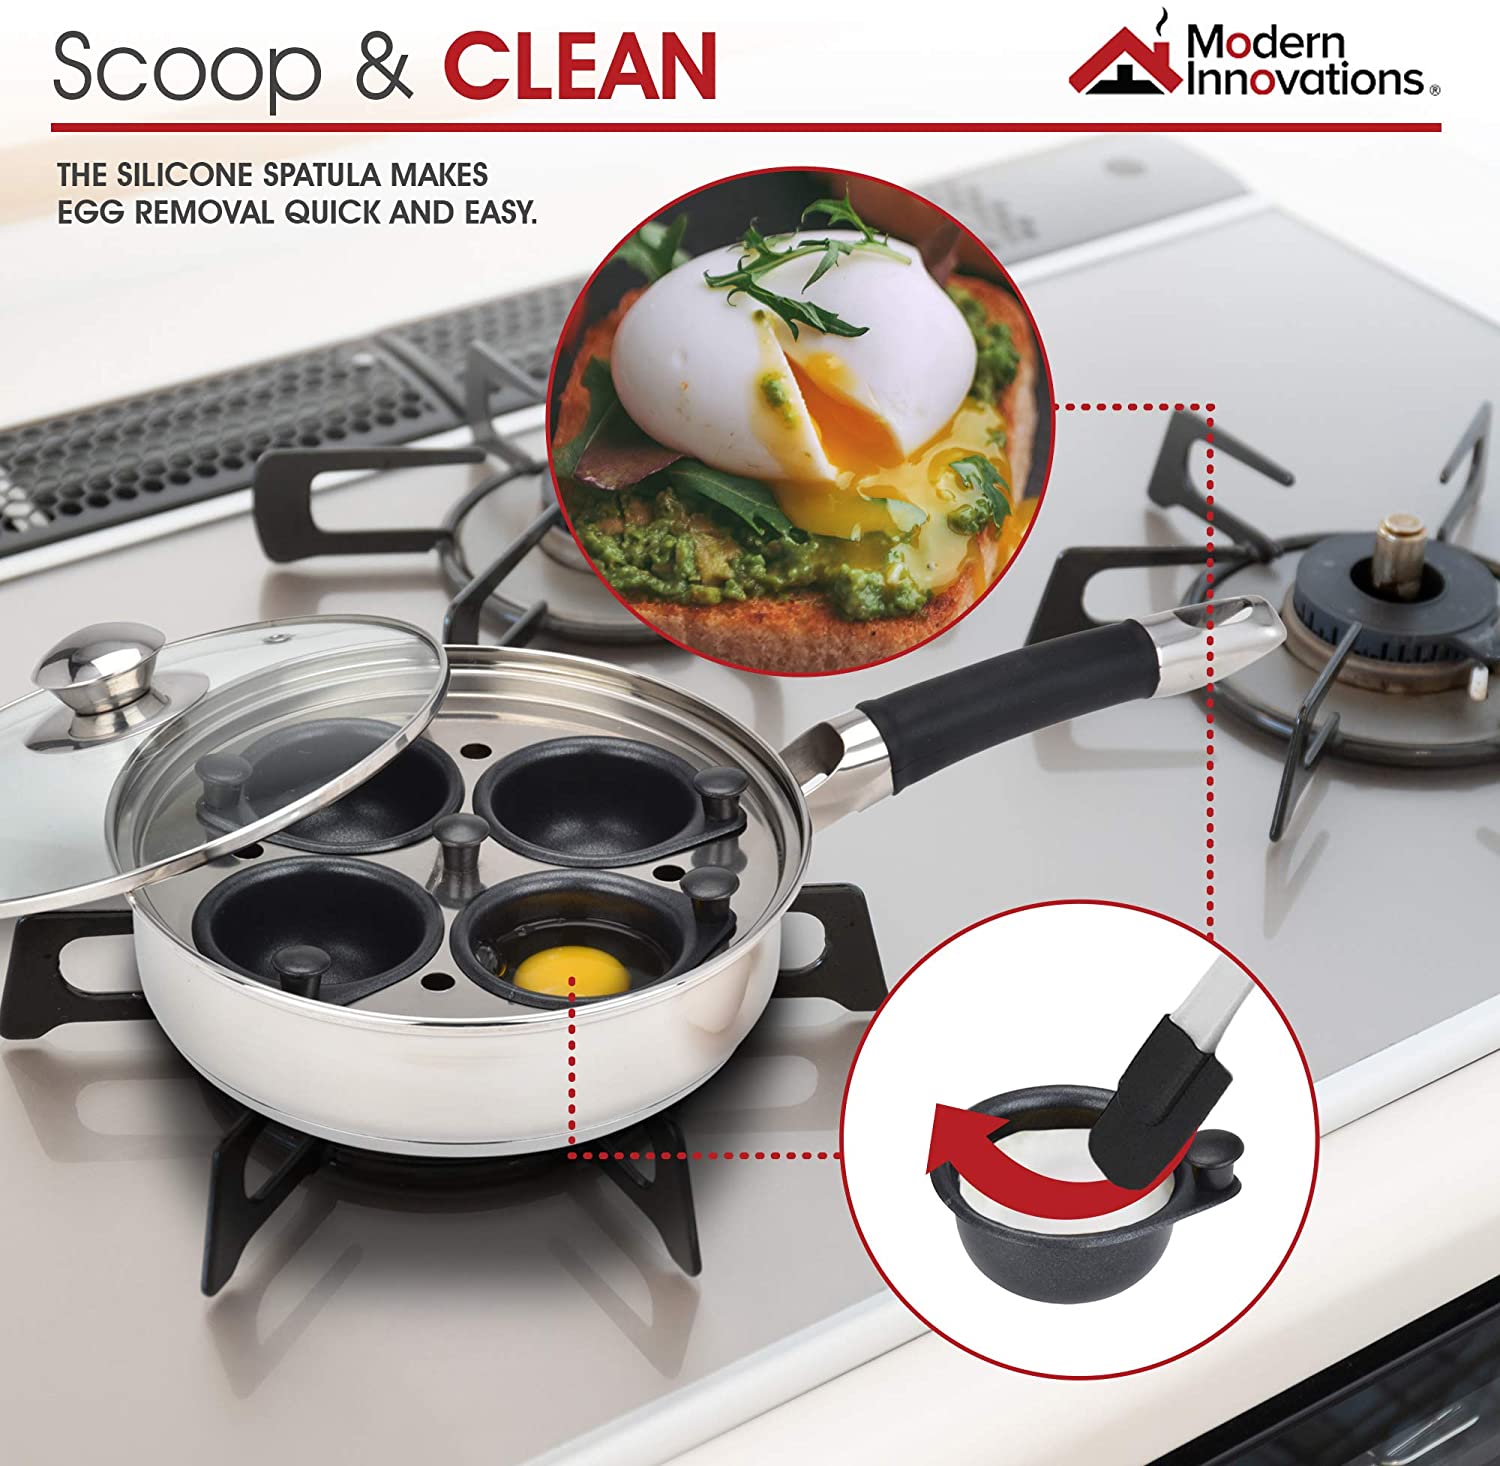 Modern Innovations Stainless Steel 4-Cup Egg Poacher Tray